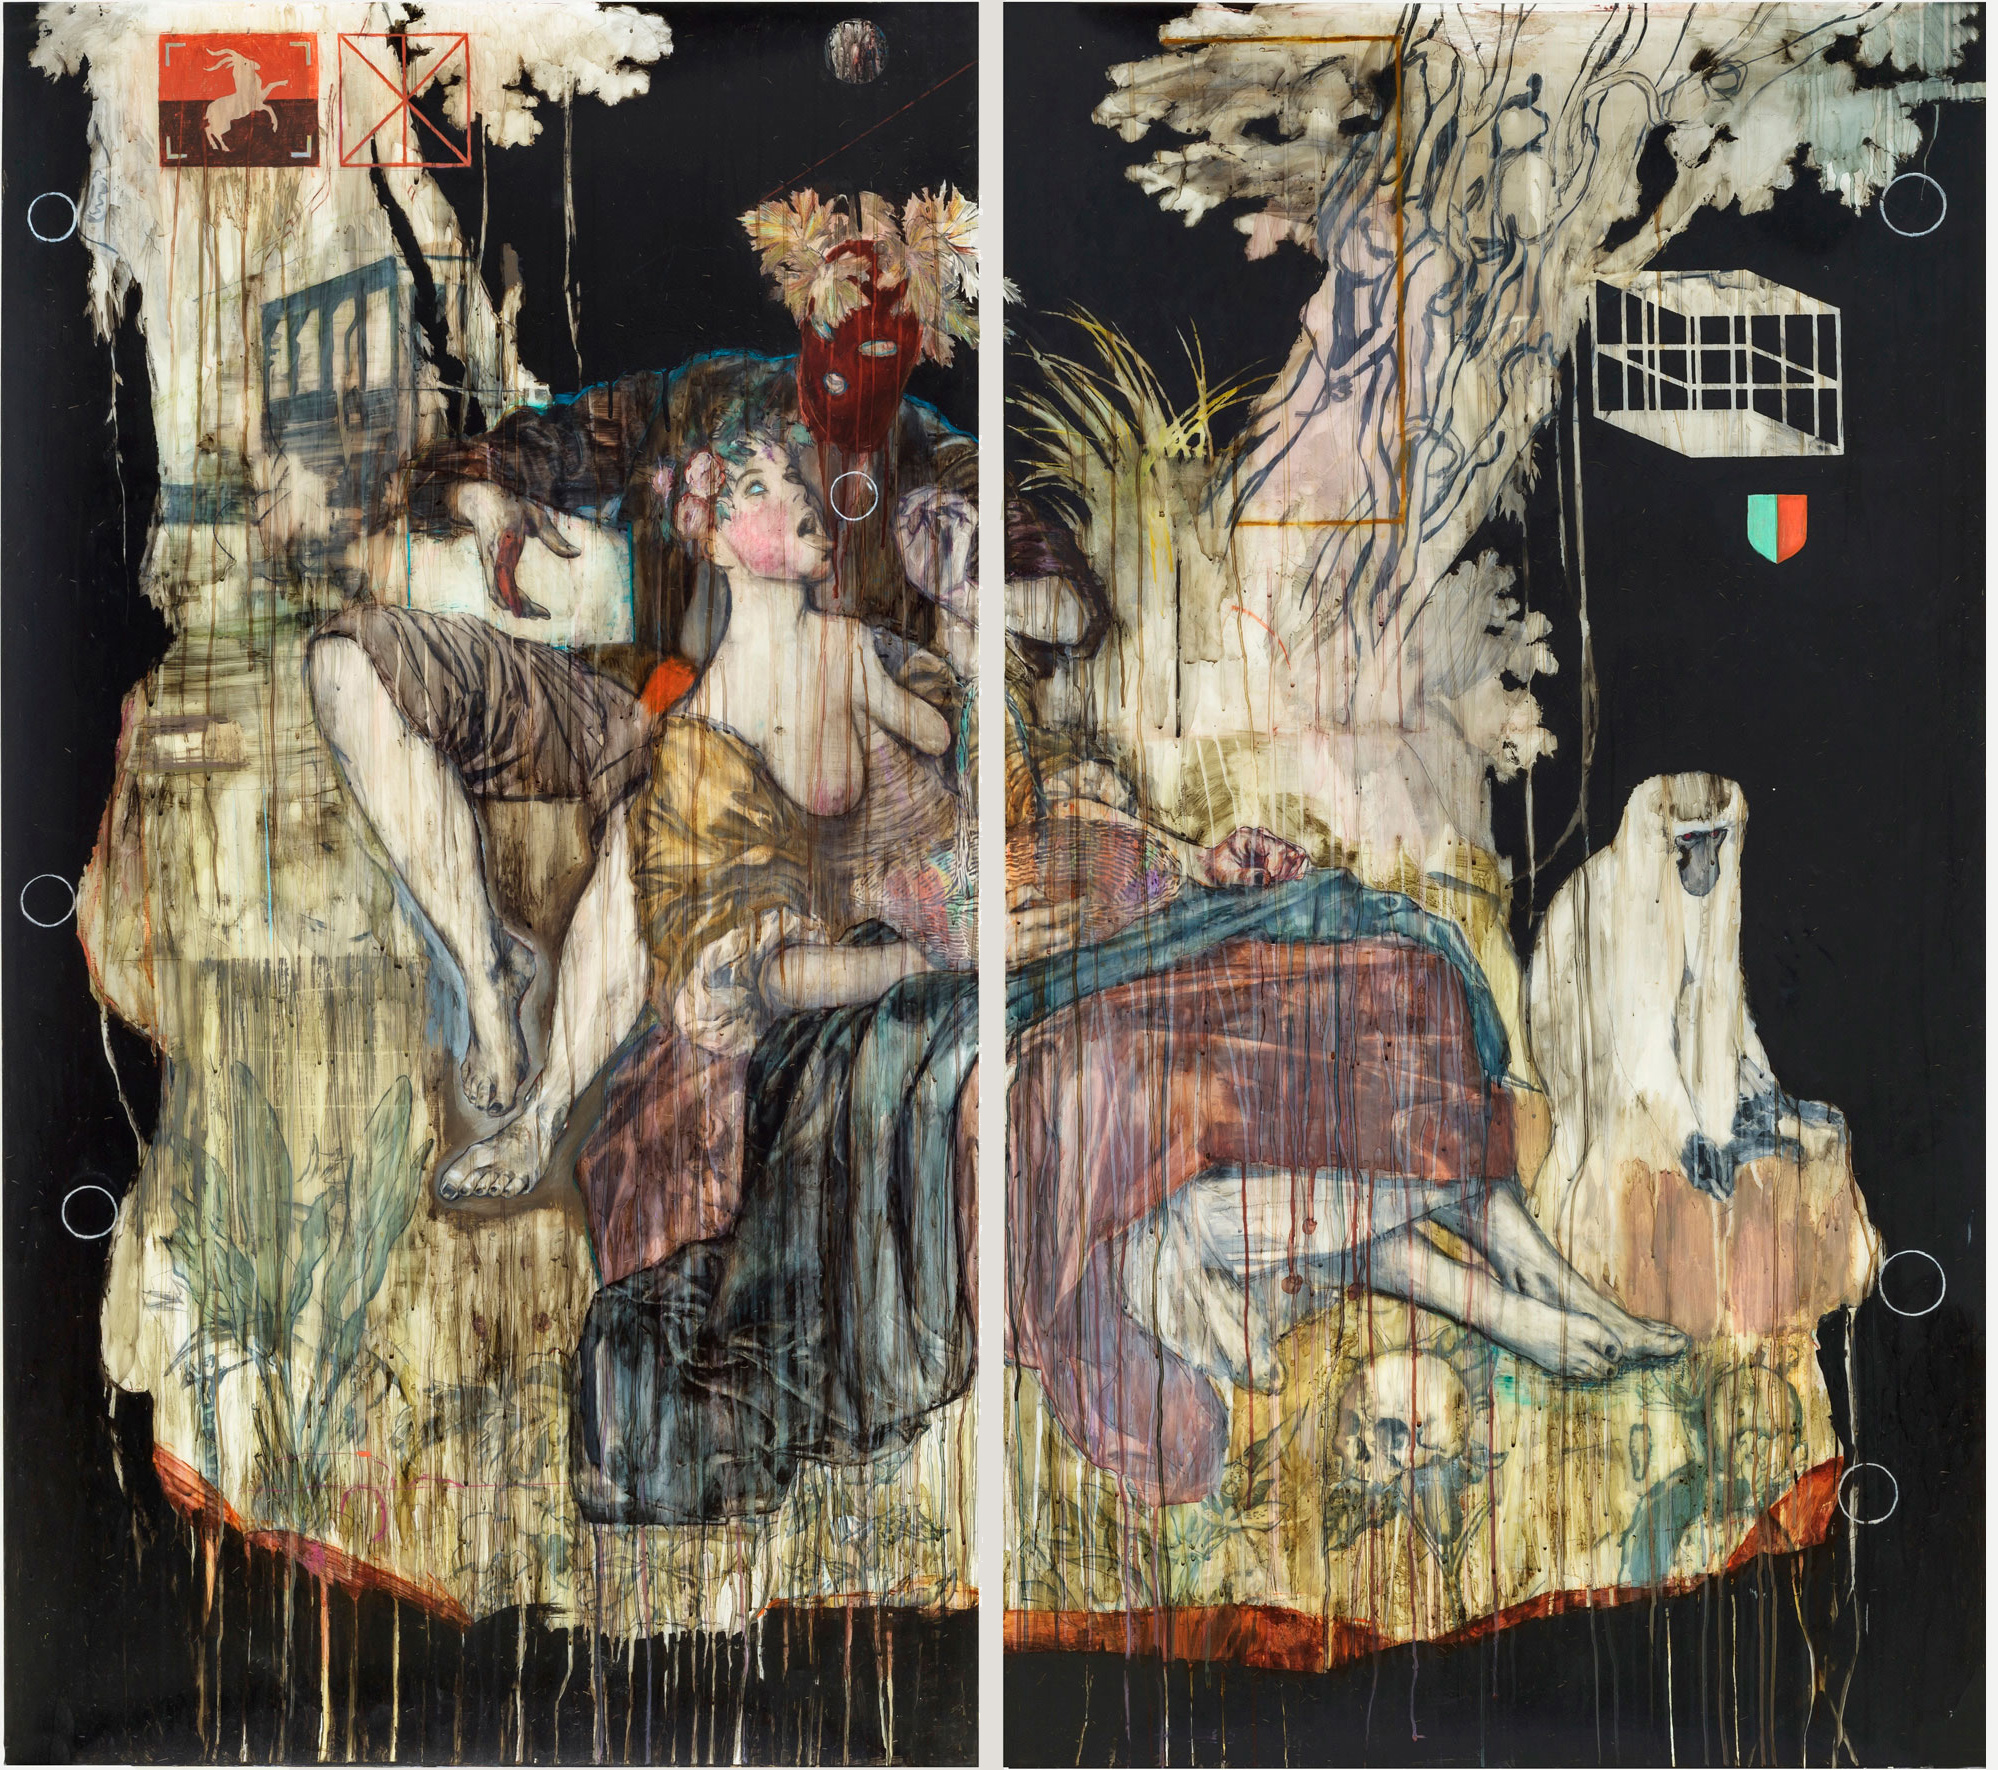   Pastorale I (d'après Boucher)  2015, Mixed media on drafting film 157.8 x 176.4 cm (on two panels) 